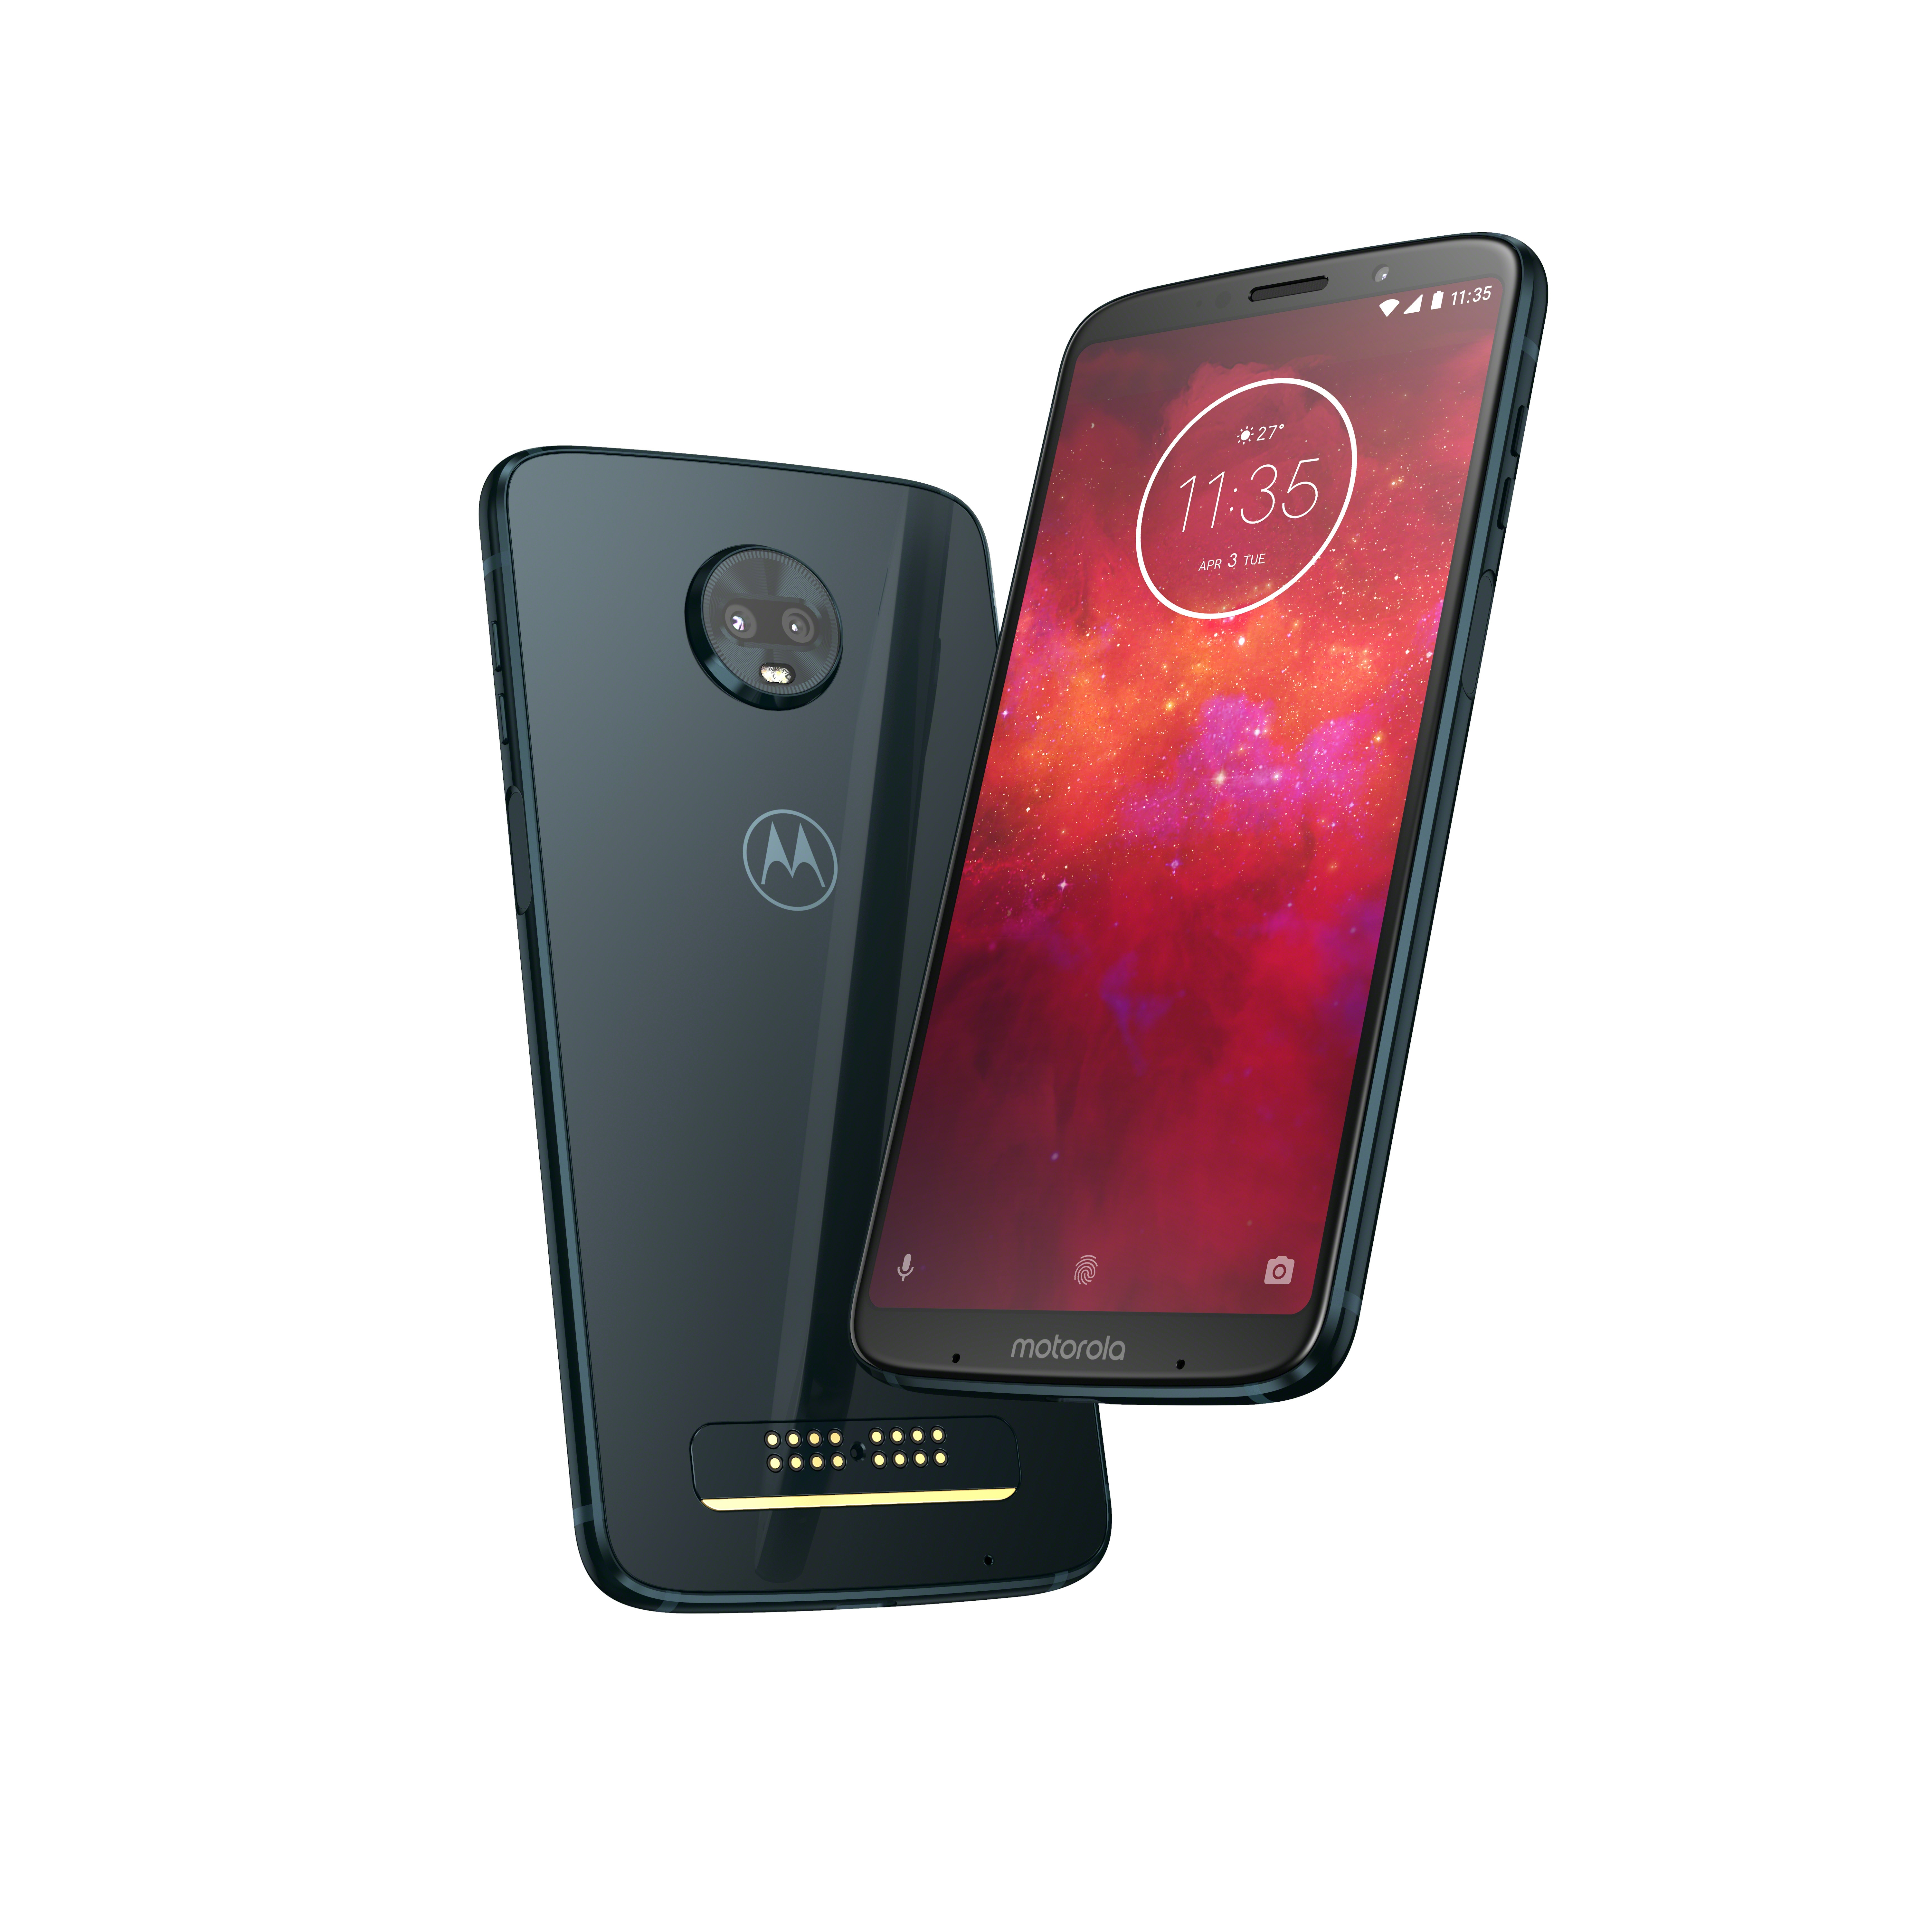 The Moto Z3 Play is official with rare, side-mounted fingerprint 